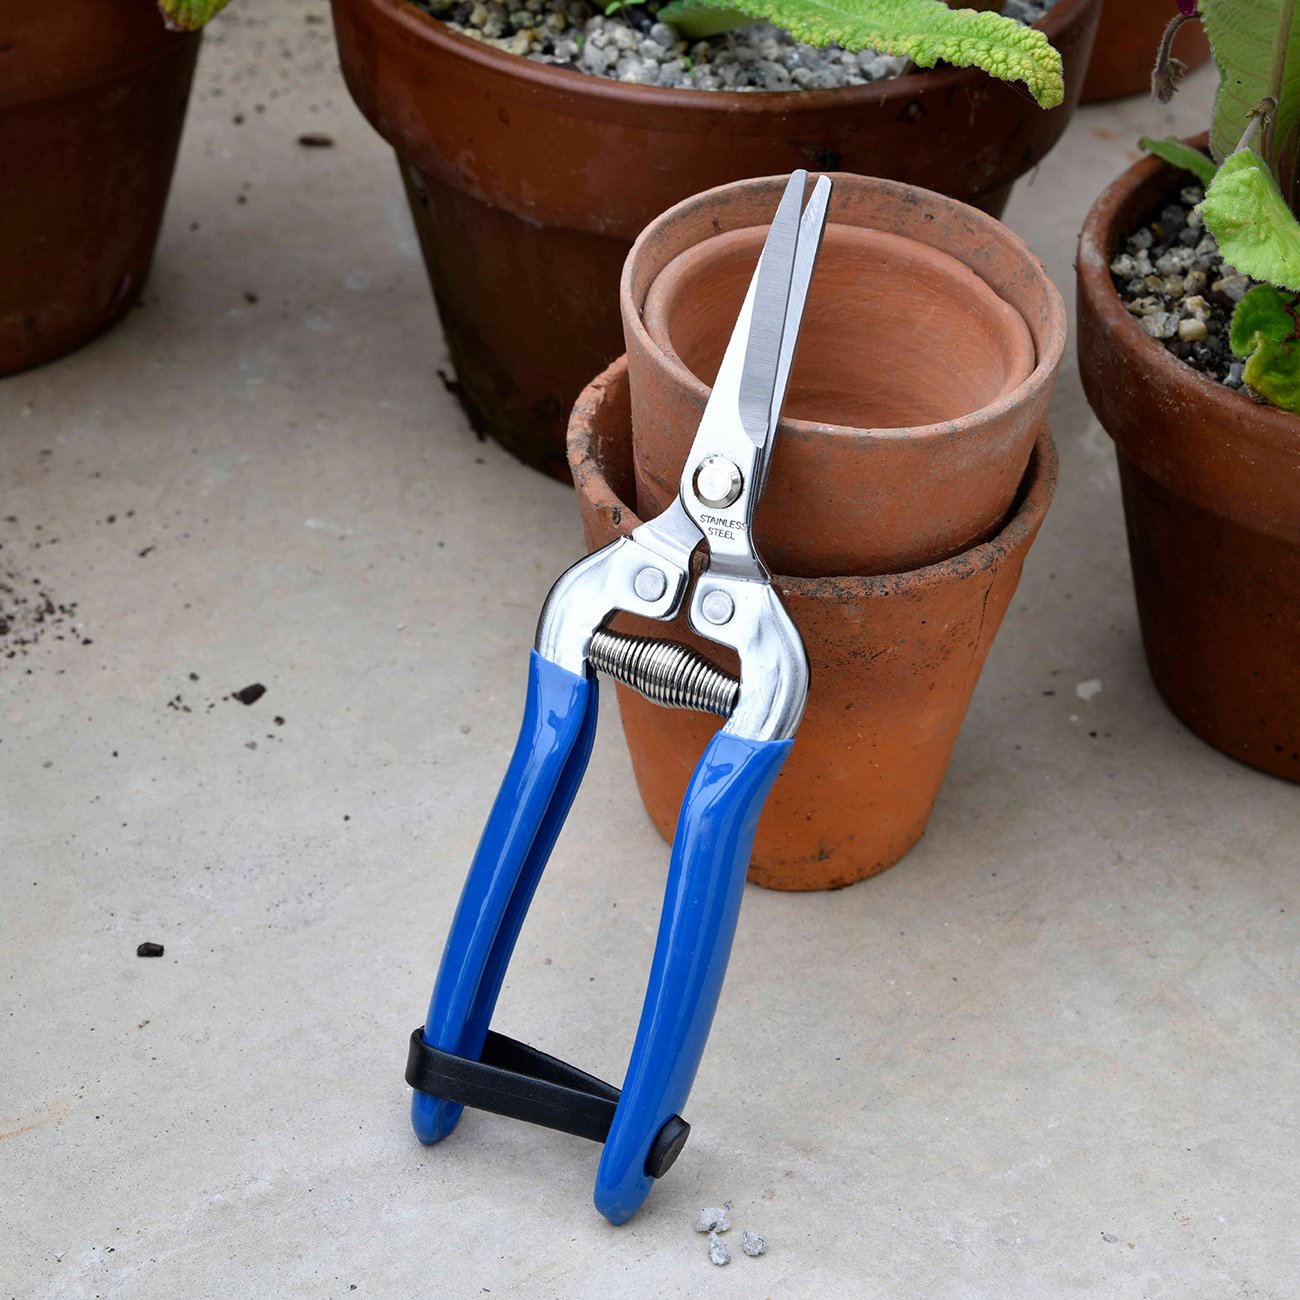 A practical and useful gift for any gardener, this pair of snips is endorsed by the Royal Horticultural Society, perhaps the ultimate recognition in gardening.